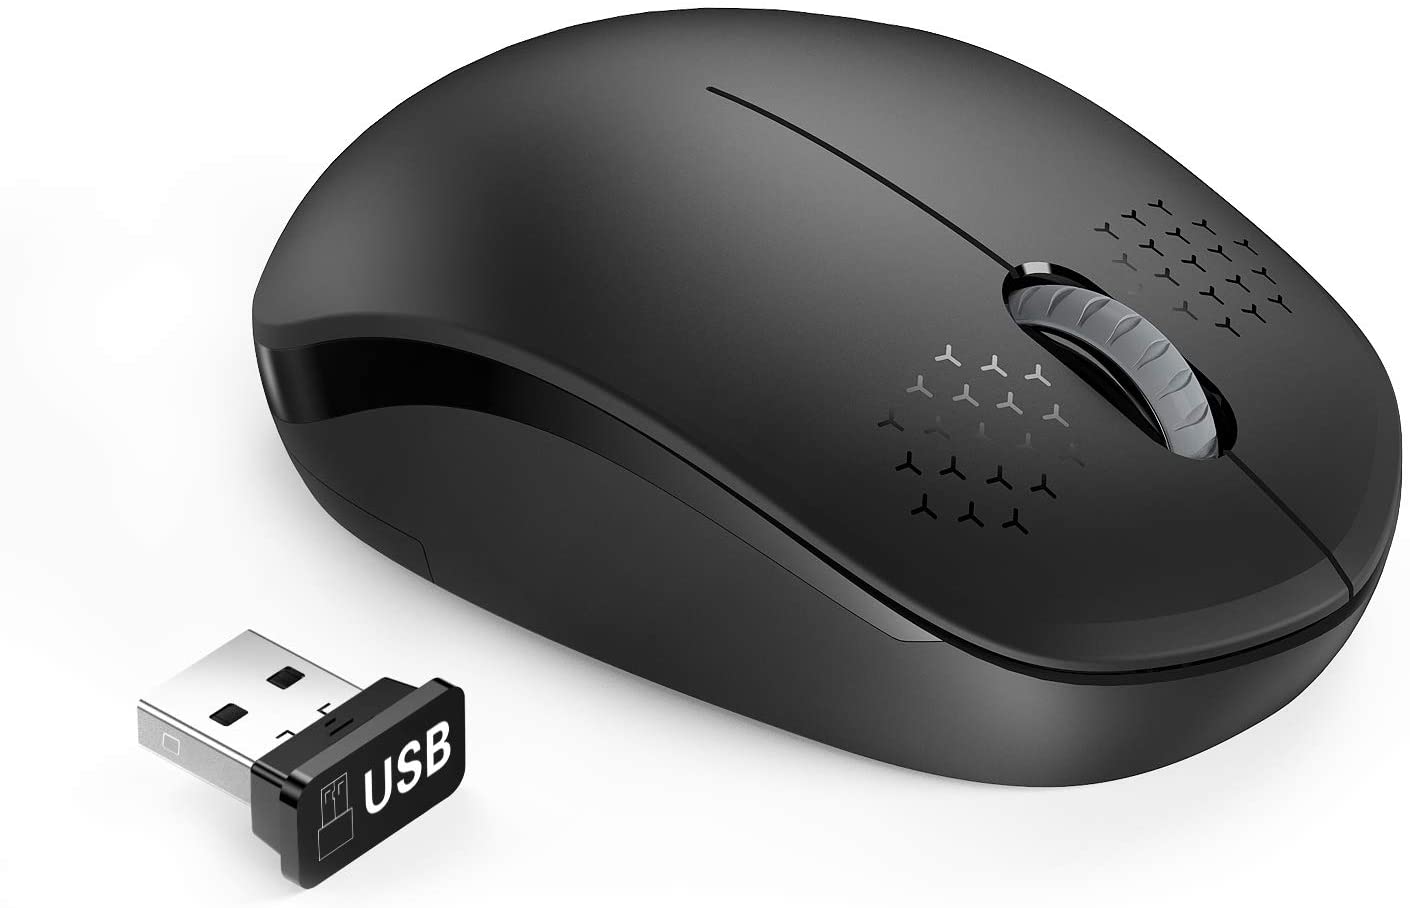 Seenda Wireless Mouse With Nano USB Receiver Noiseless 2.4G Wireless Mouse Portable Optical Mice For Notebook, PC, Laptop, Computer, Macbook - Black